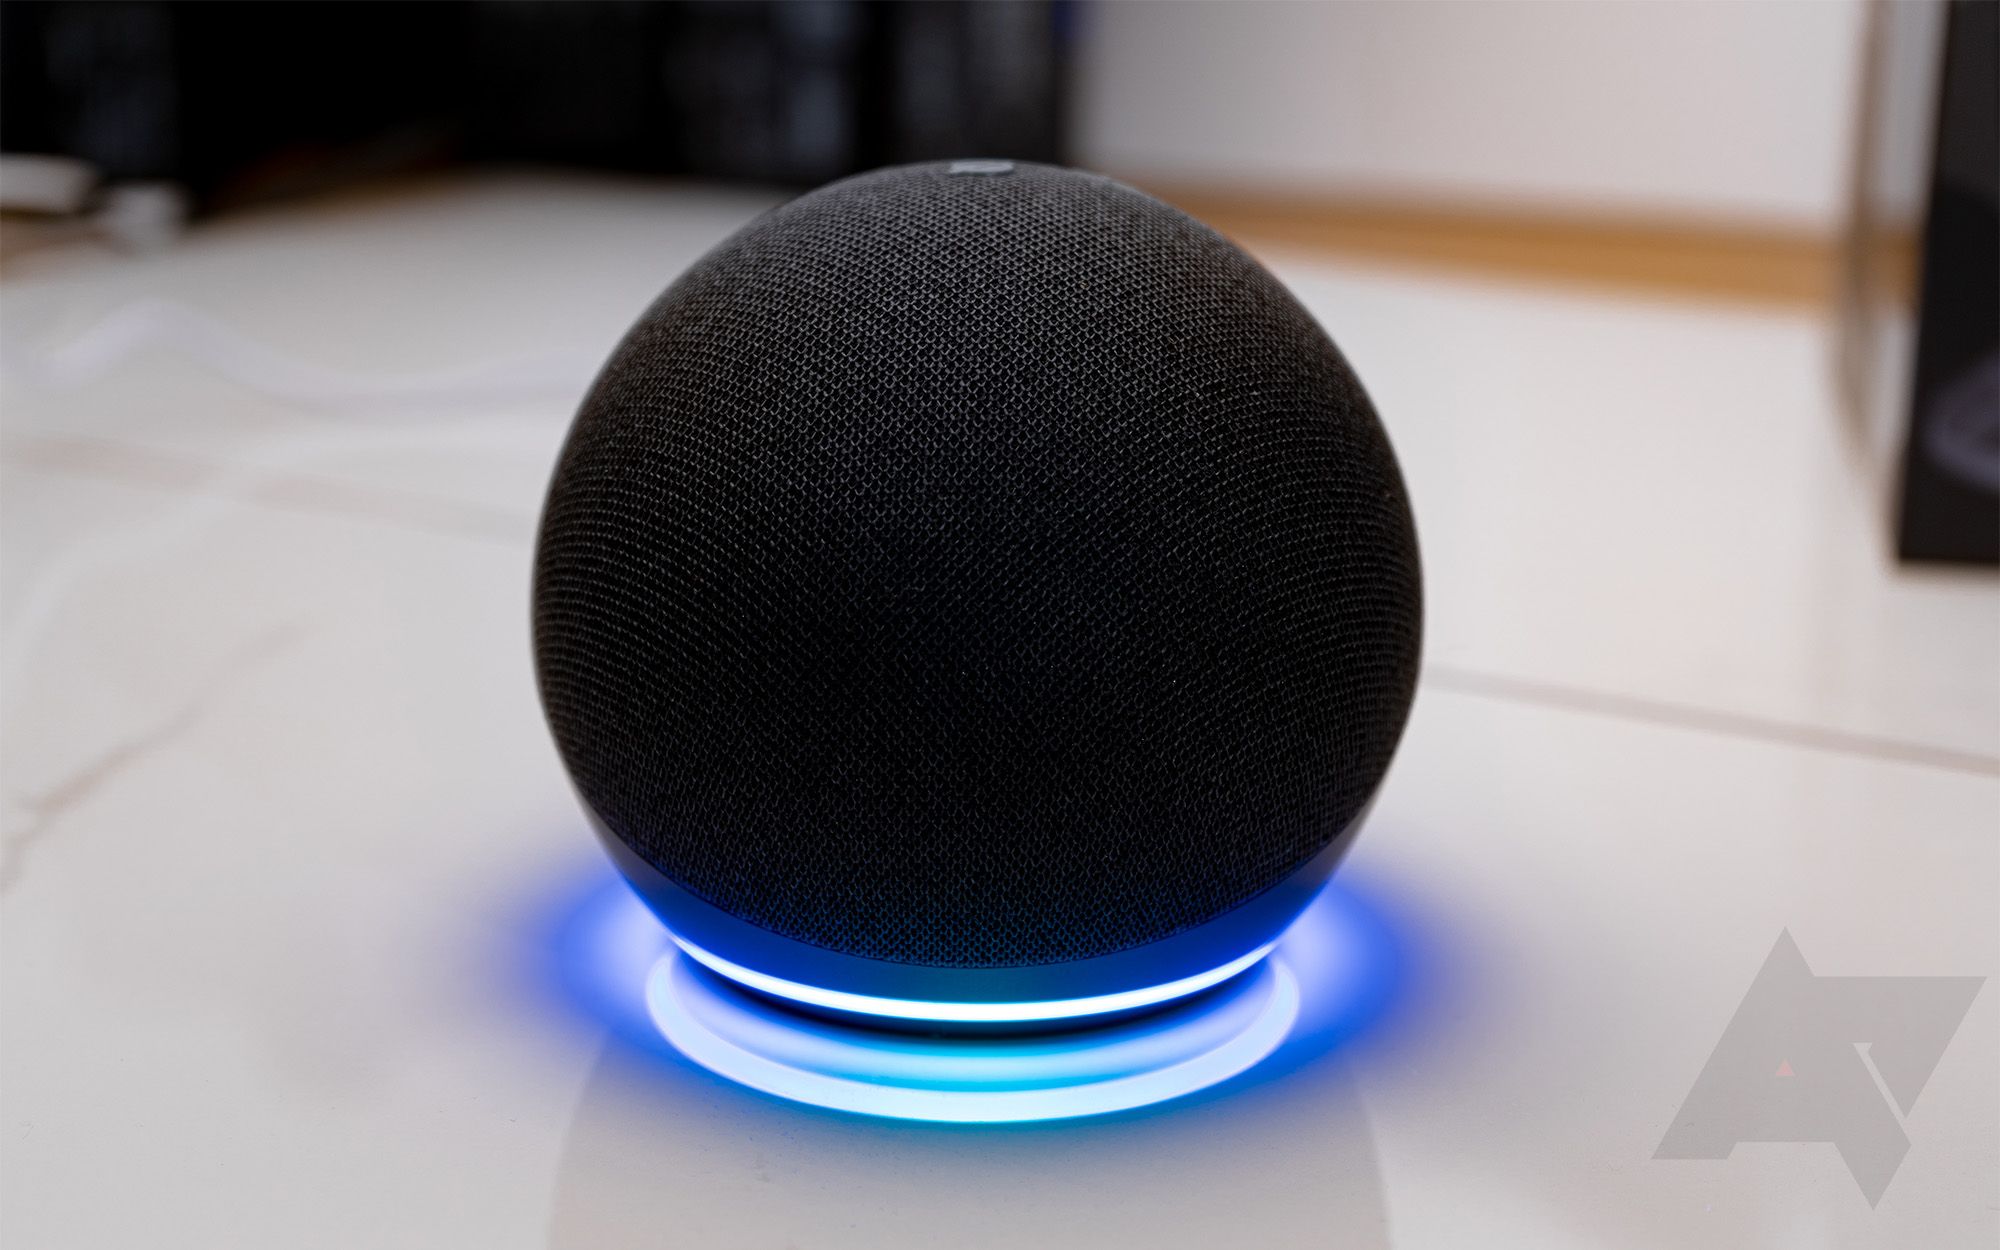 The Amazon Echo Dot 4th gen with the bottom ring lighted showing that the speaker is on